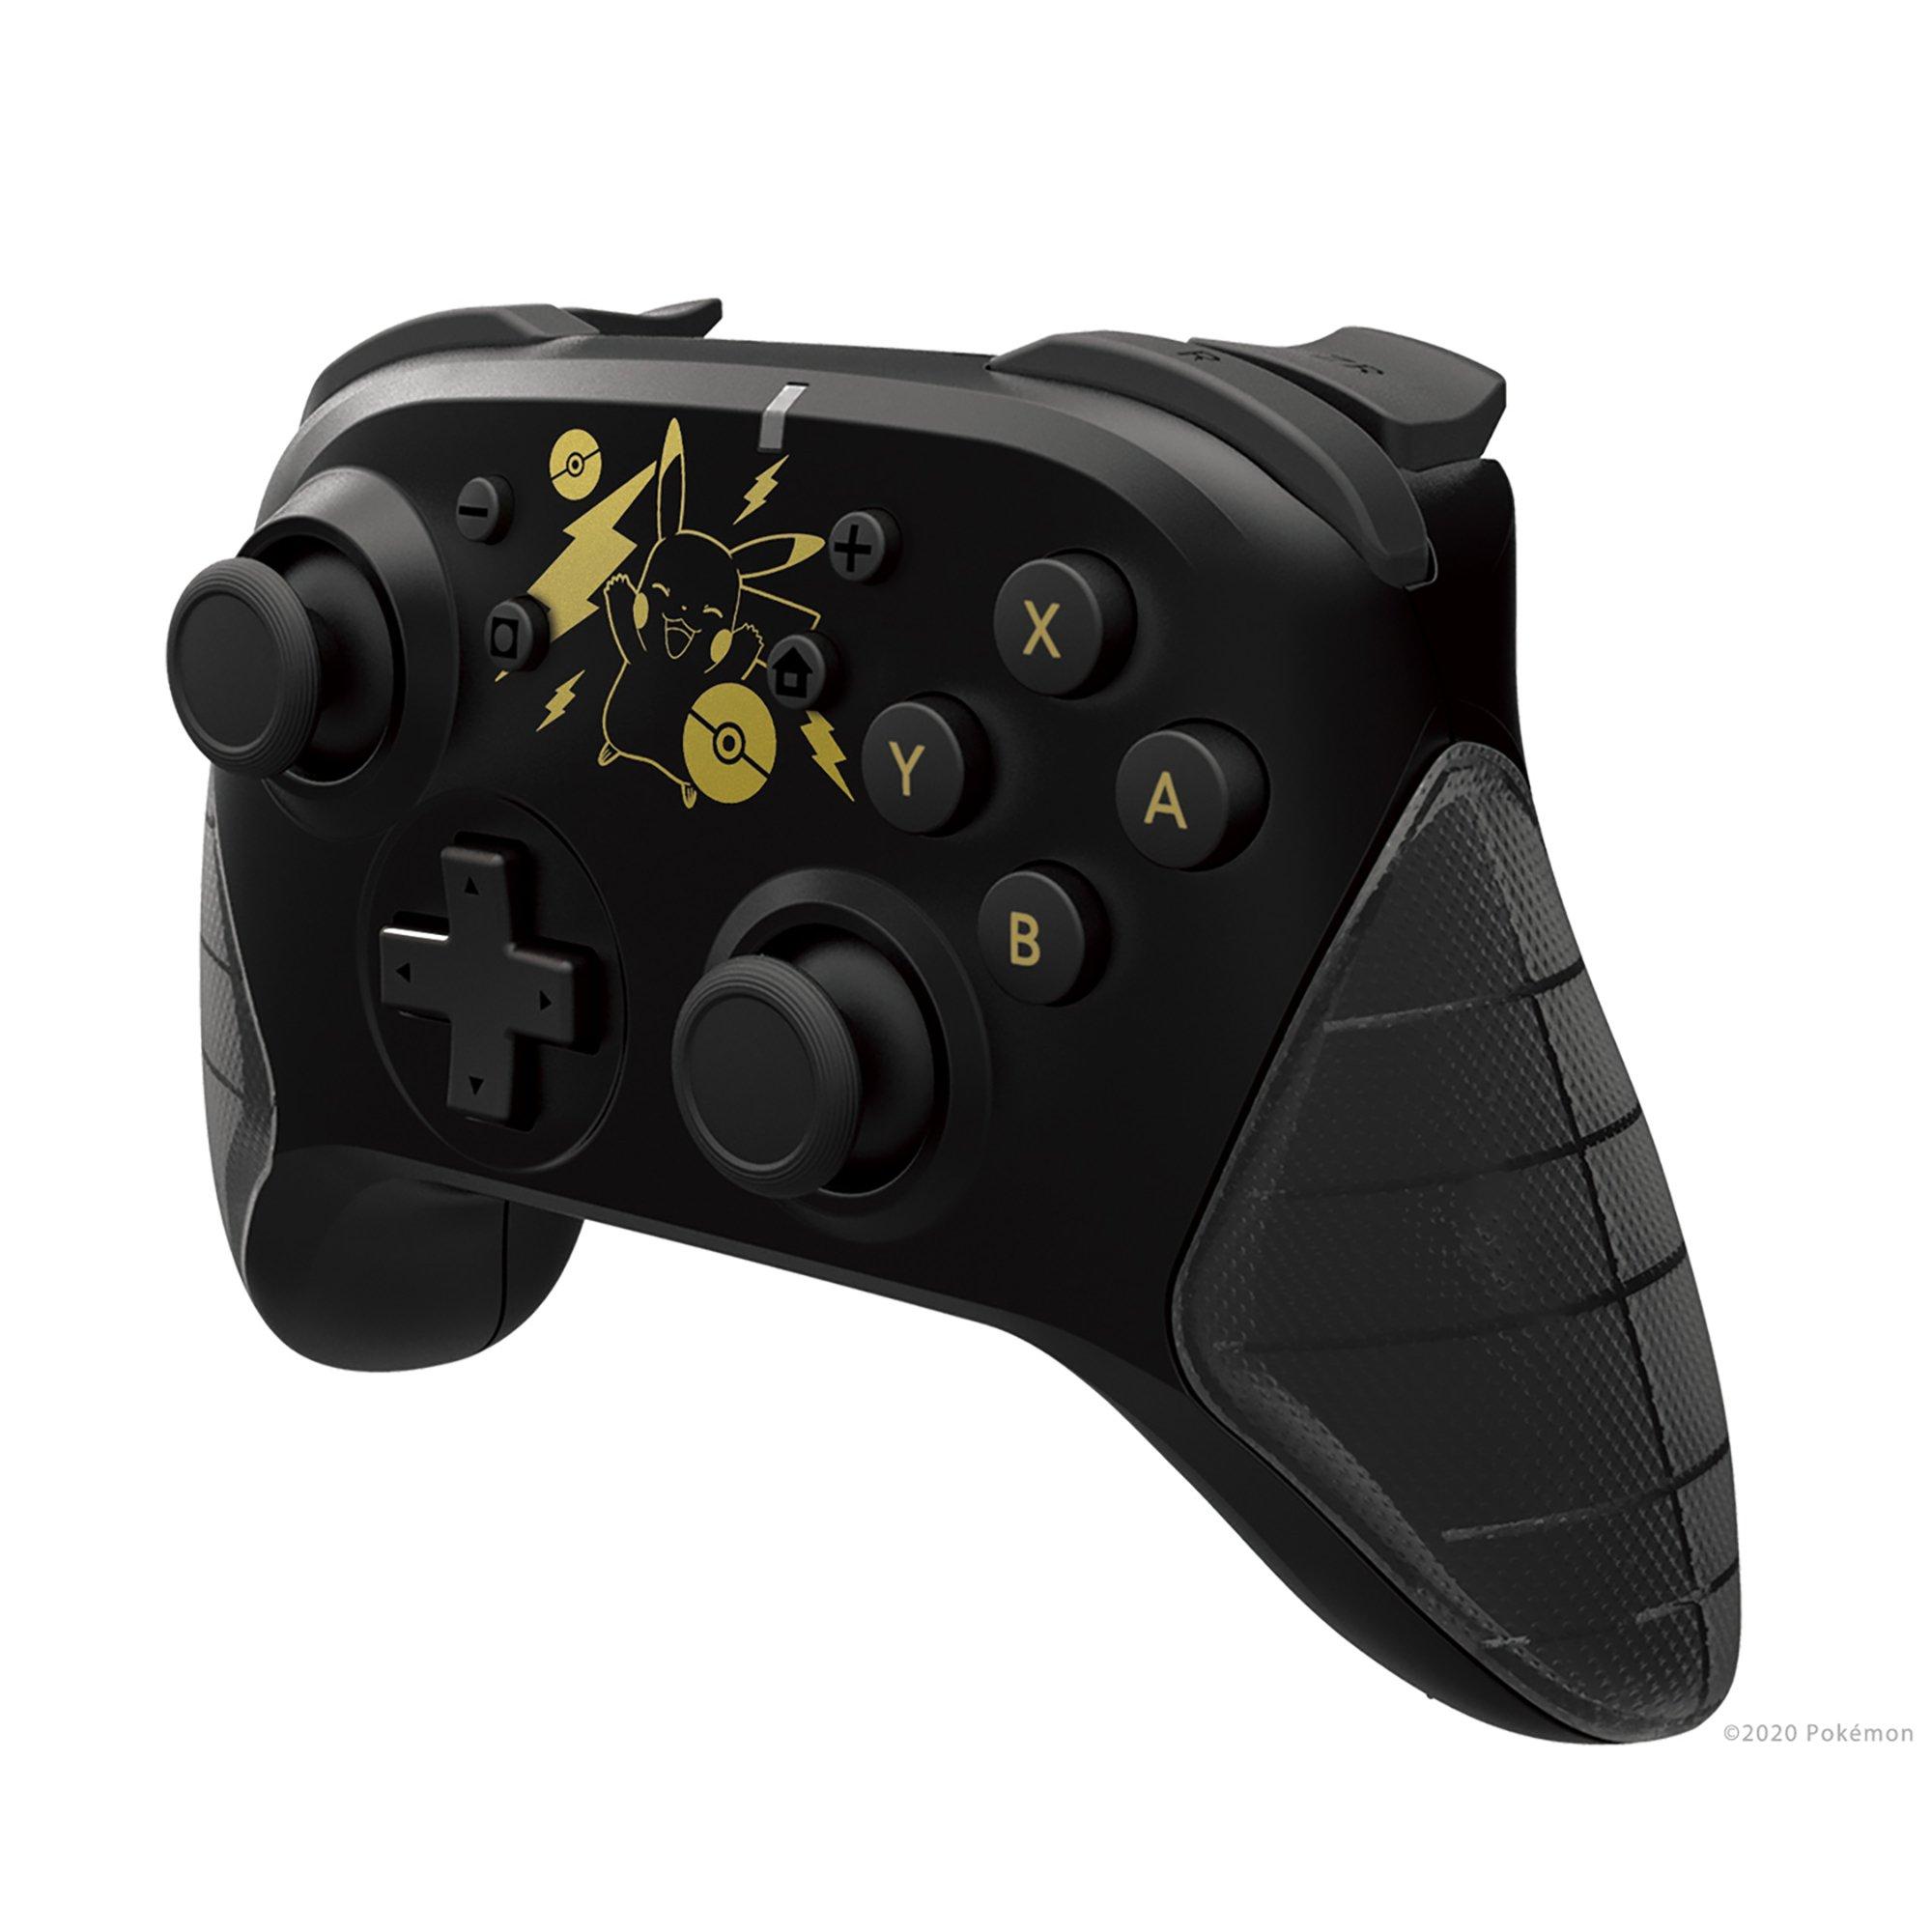 list item 2 of 4 HORIPAD Wireless Controller for Nintendo Switch Pikachu Black and Gold